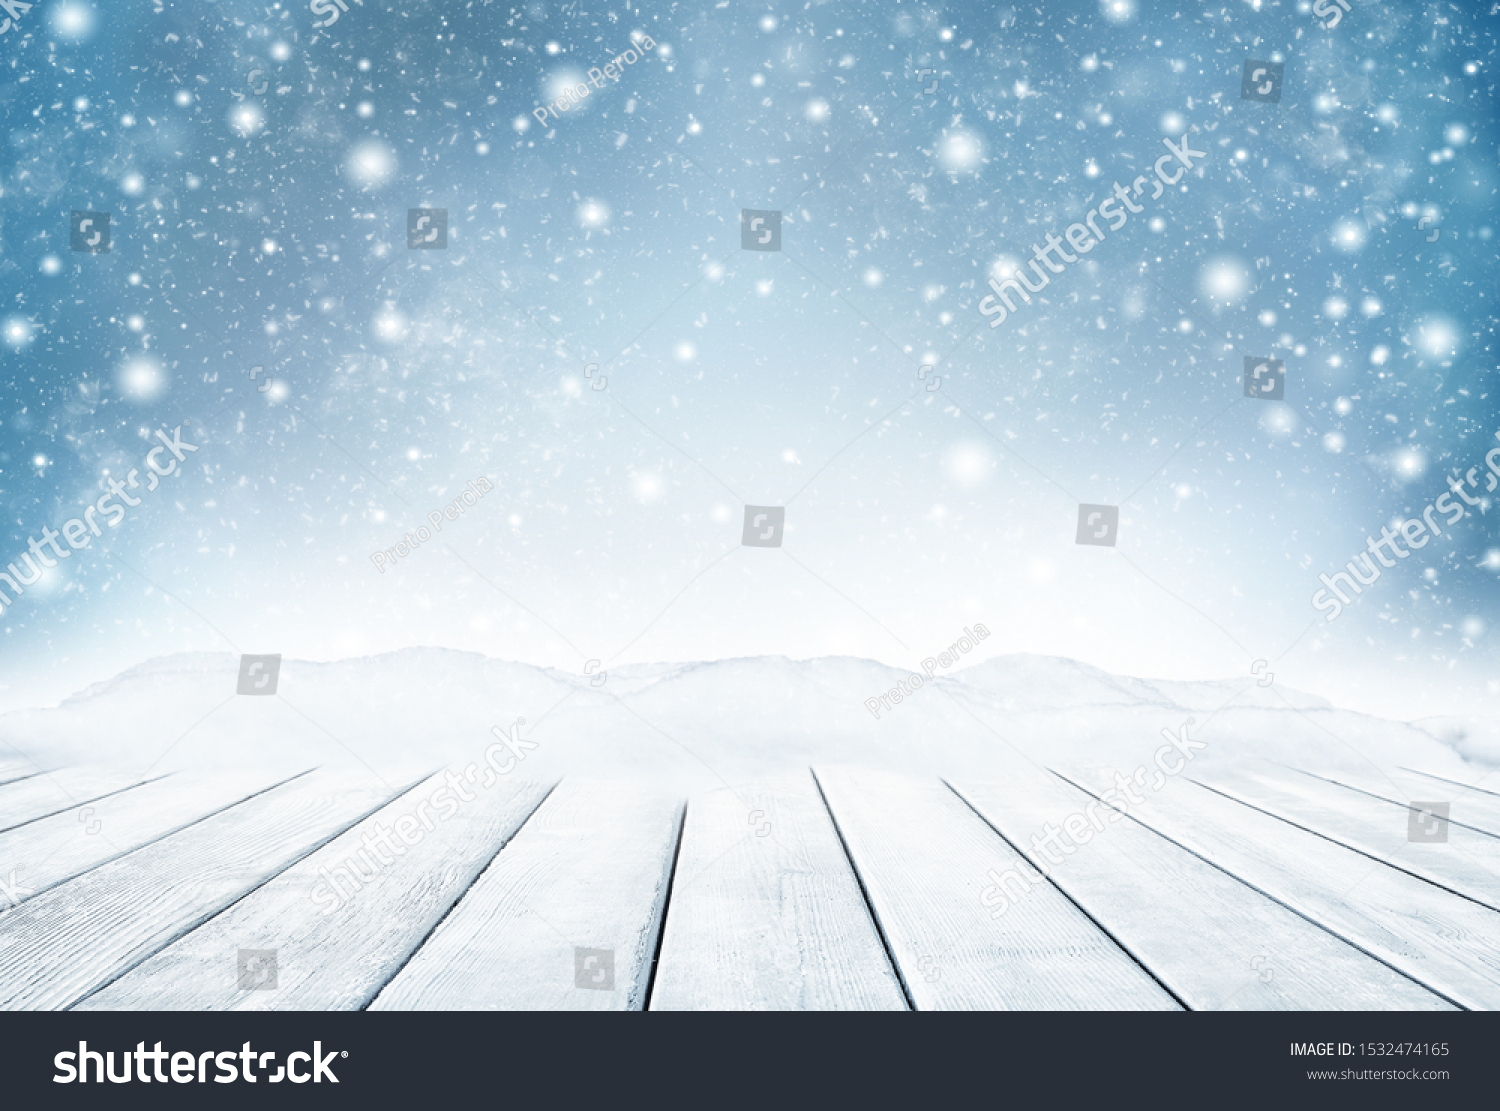 Decorative Christmas background with bokeh lights, snowflakes and empty old wooden table. Christmas and Happy New Year blue background with snowflake. Winter landscape with falling snow. #1532474165